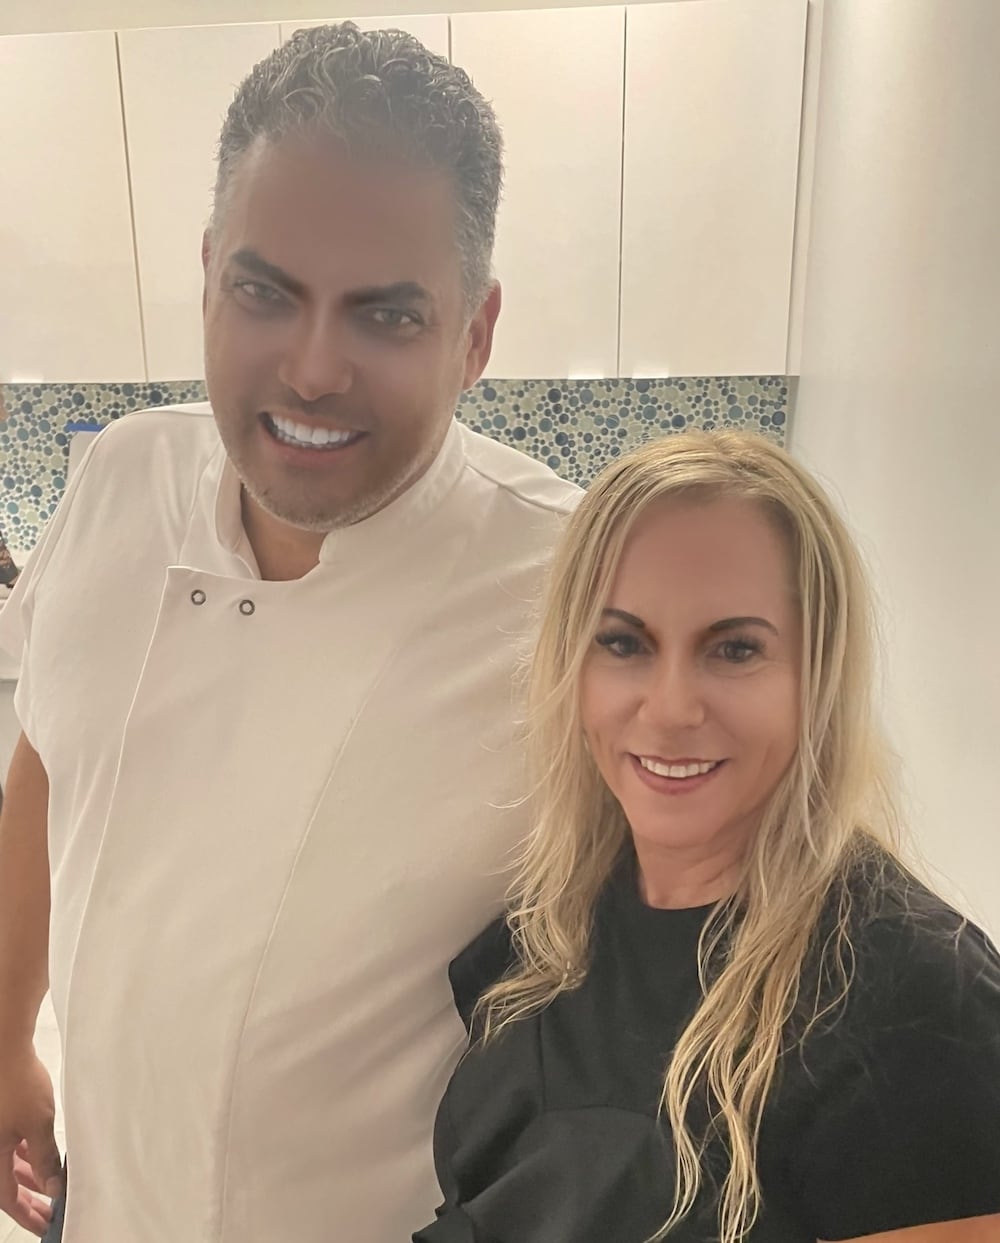 Two smiling adults, a man and a woman, standing in a kitchen with a white and blue tiled backsplash during the Grand Opening. The man wears a white shirt, and the woman is in a